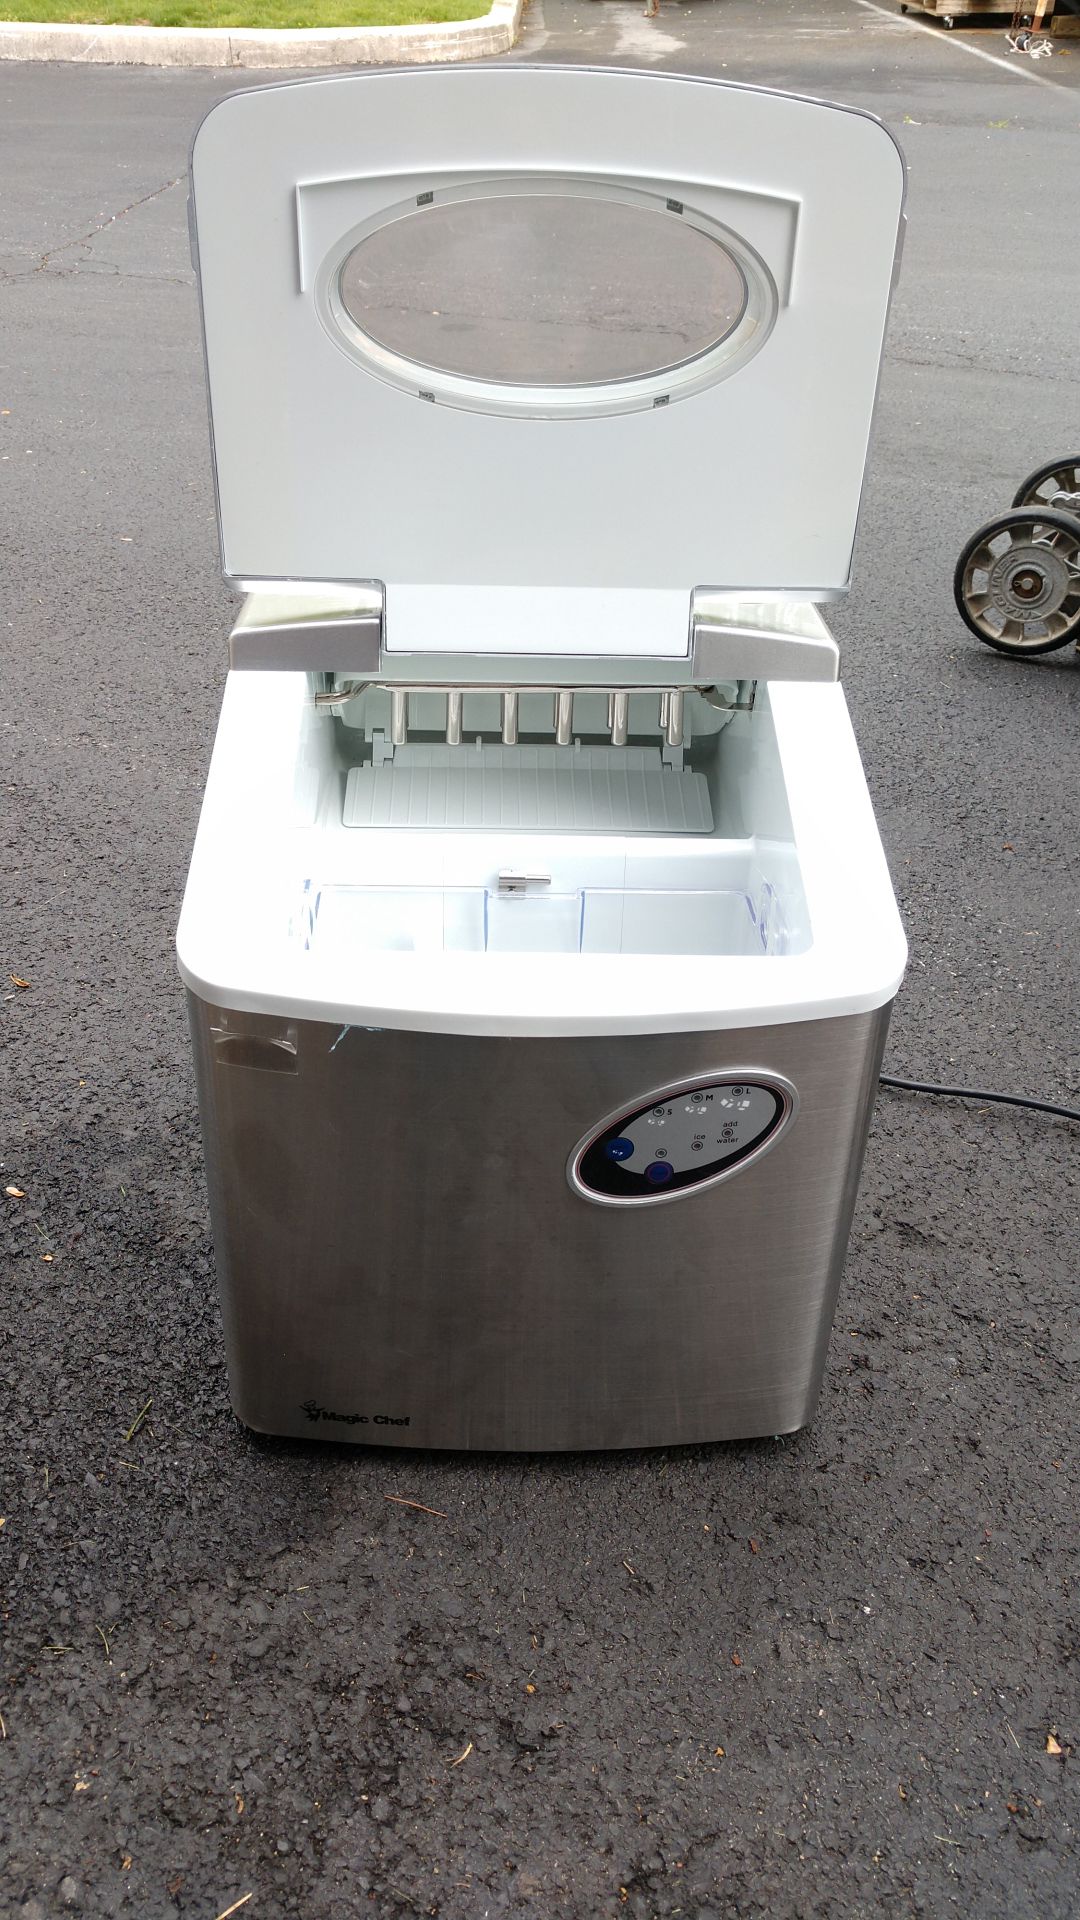 Portable Ice Maker, Stainless Steel, large capacity, brand new.